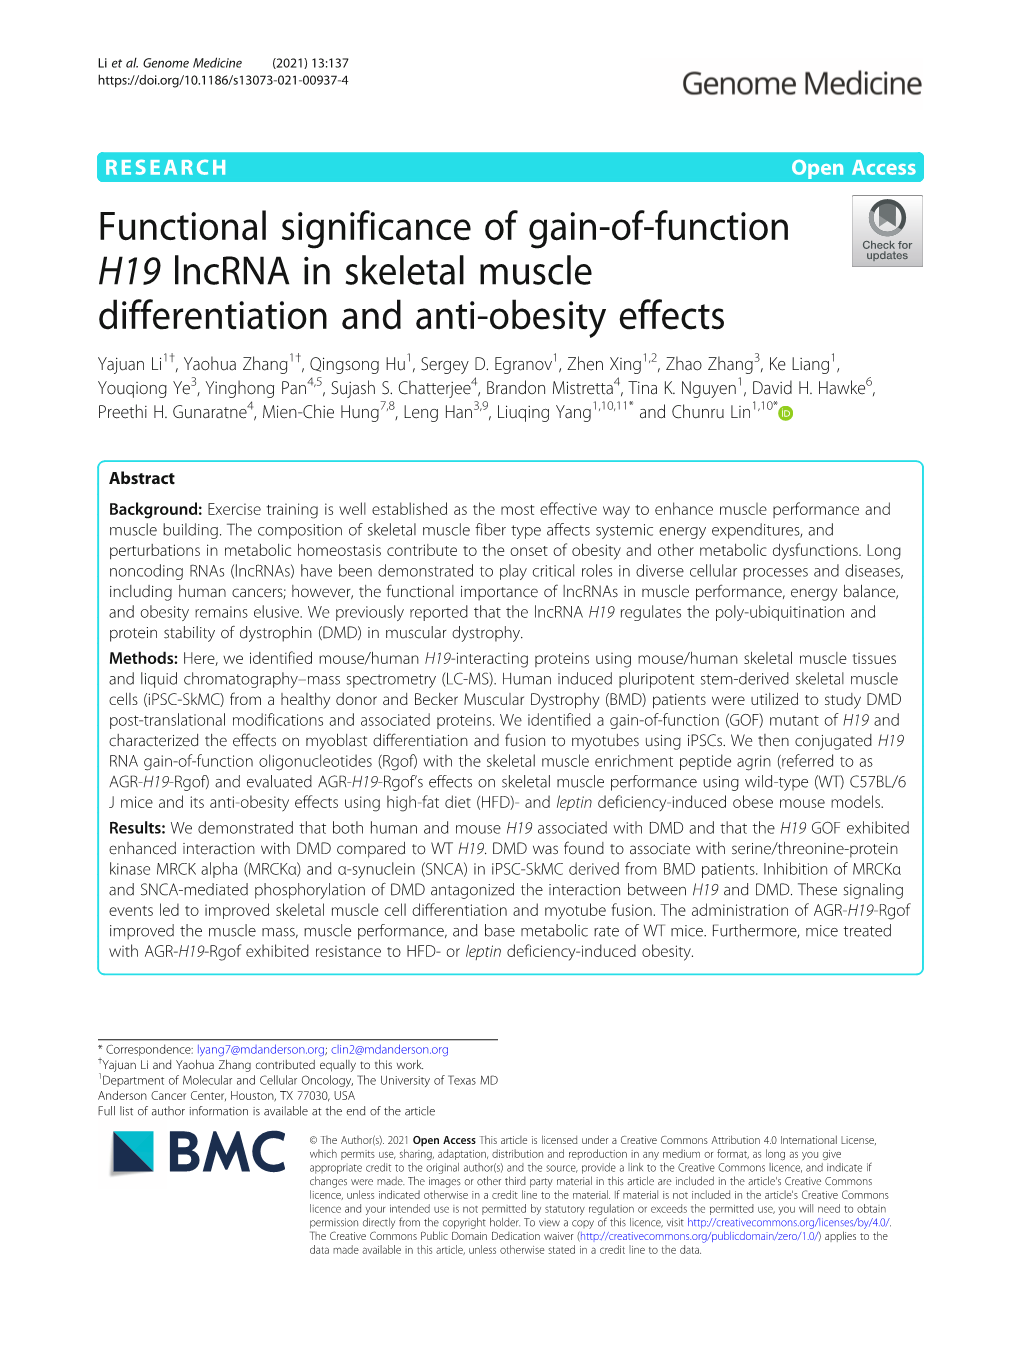 Functional Significance of Gain-Of-Function H19 Lncrna in Skeletal Muscle Differentiation and Anti-Obesity Effects Yajuan Li1†, Yaohua Zhang1†, Qingsong Hu1, Sergey D